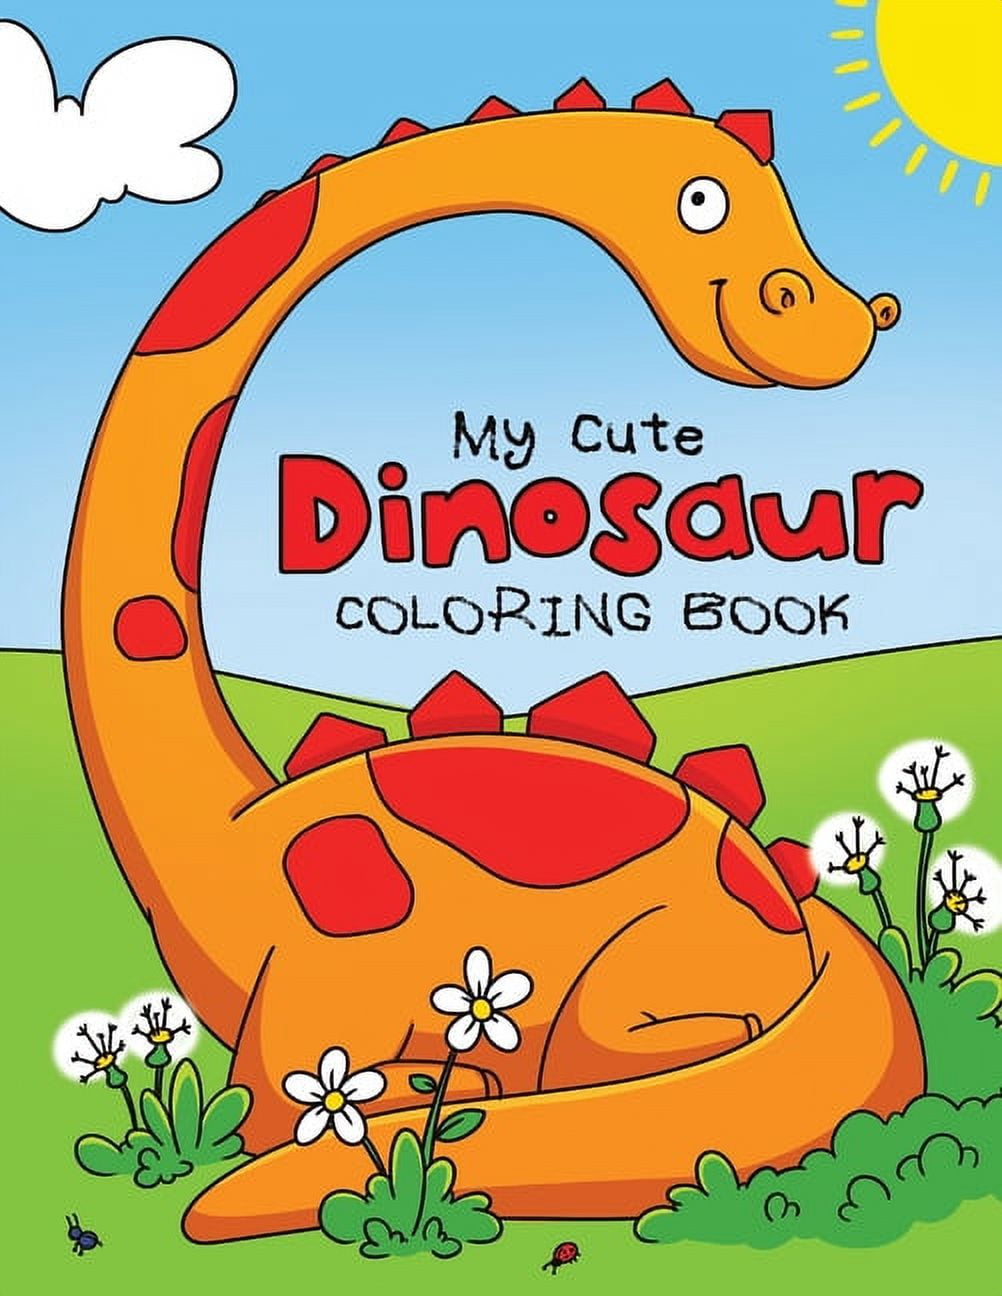 Dinosaur Coloring Books for Kids ages 2-4: Fun Dinosaur Coloring Book for  Kids, Toddlers and Preschoolers, Mess Free (Paperback)